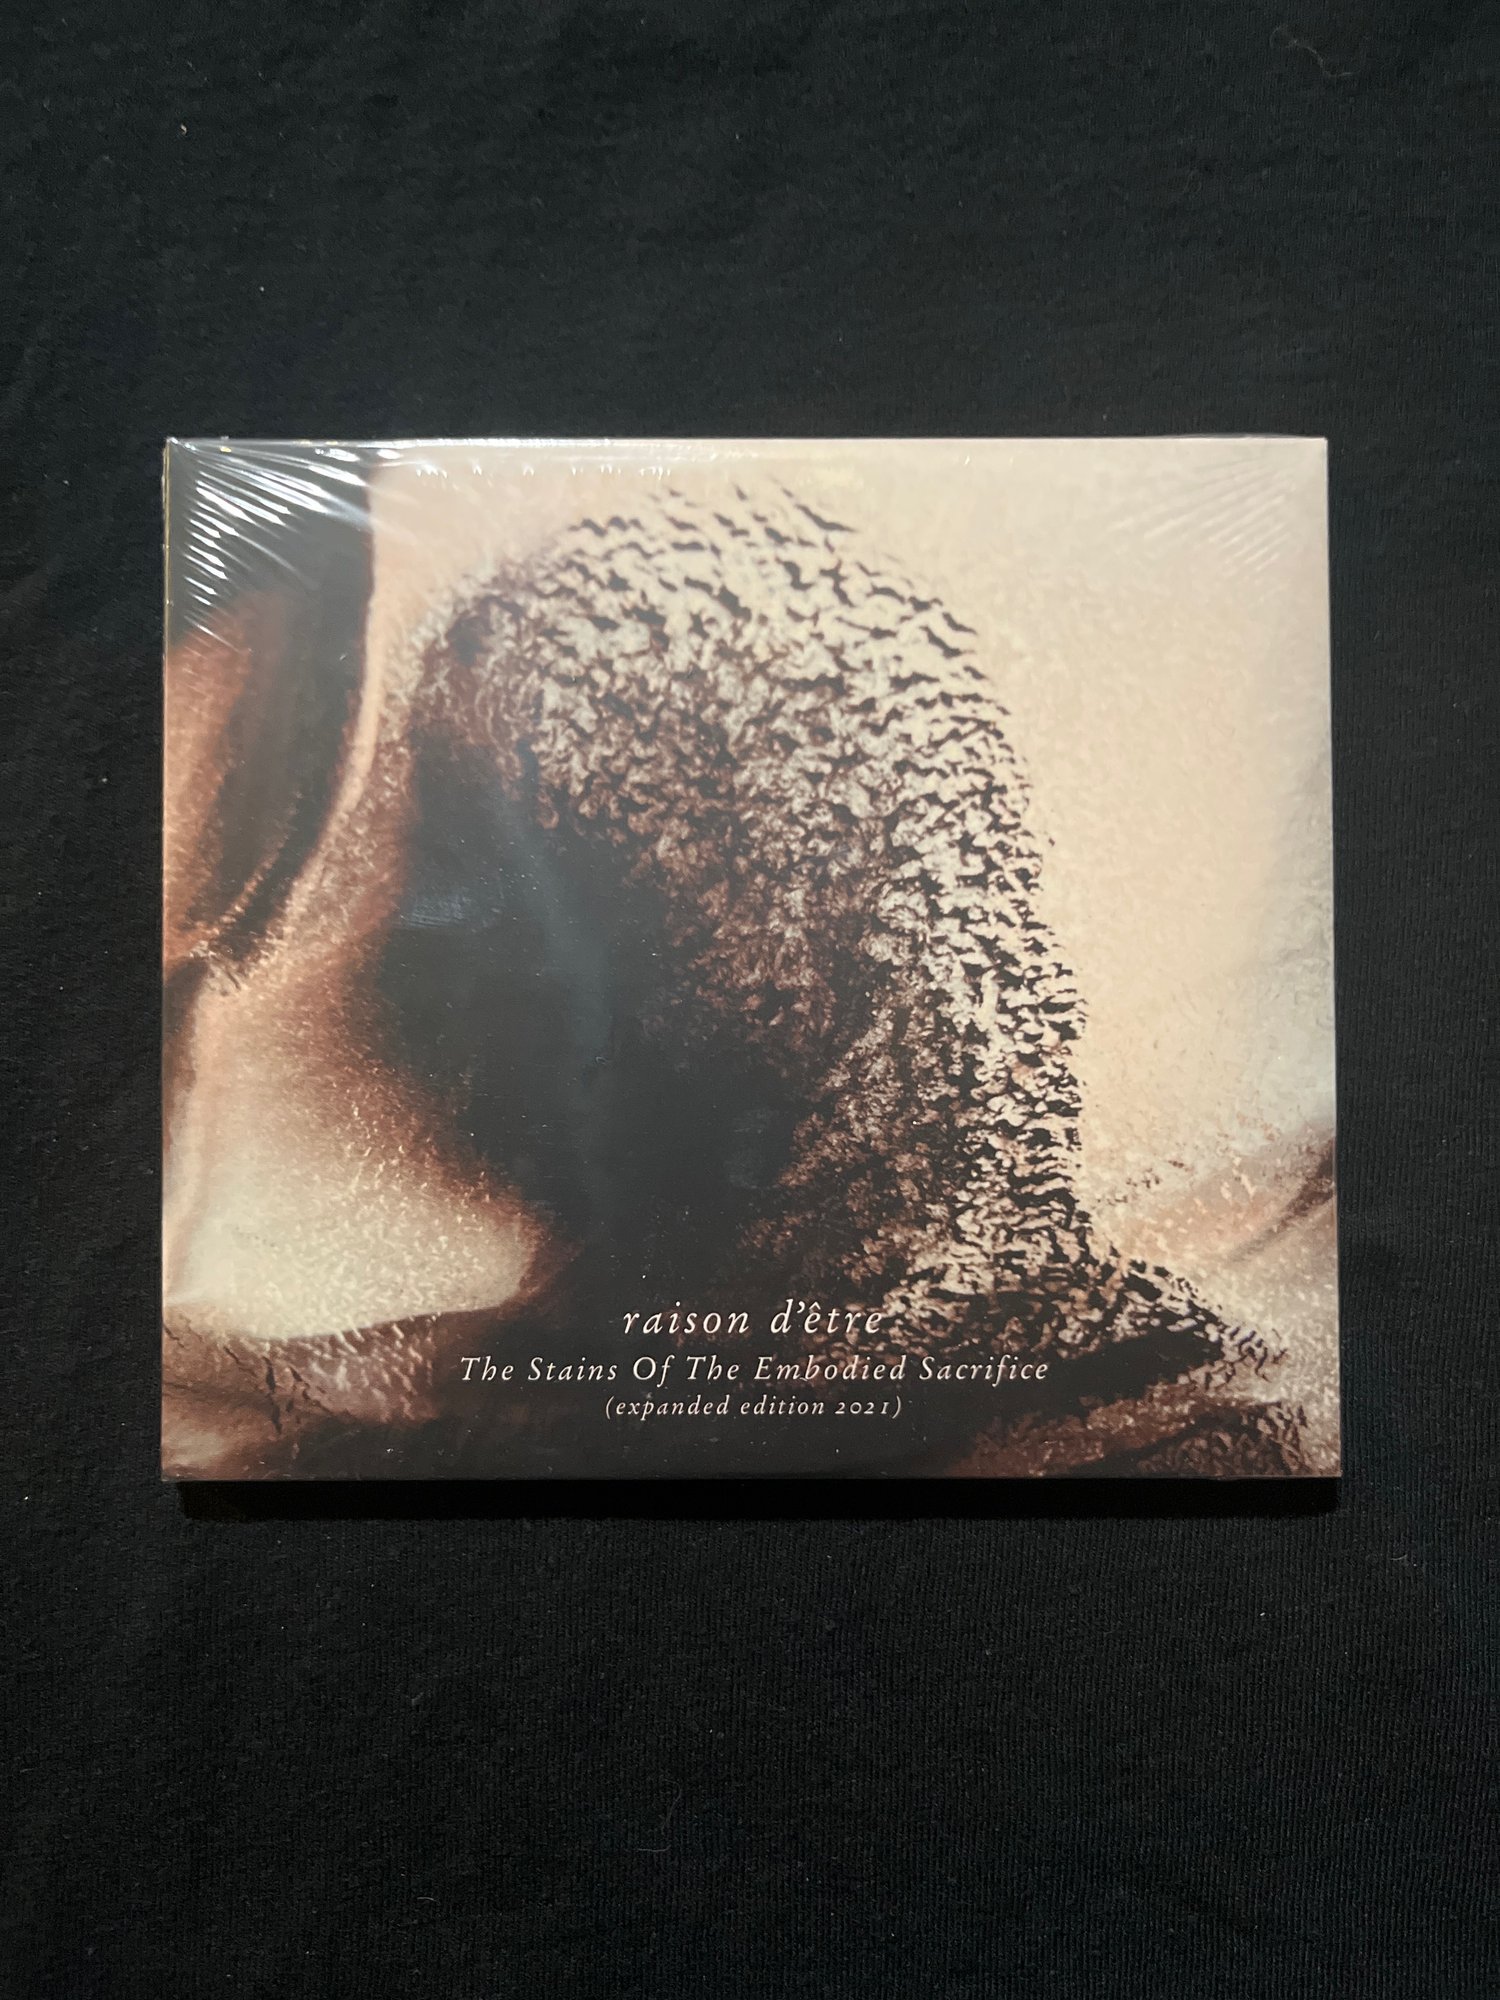 raison d'être – The Stains Of The Embodied Sacrifice (Expanded Edition 2021) 2xCD (OEC)